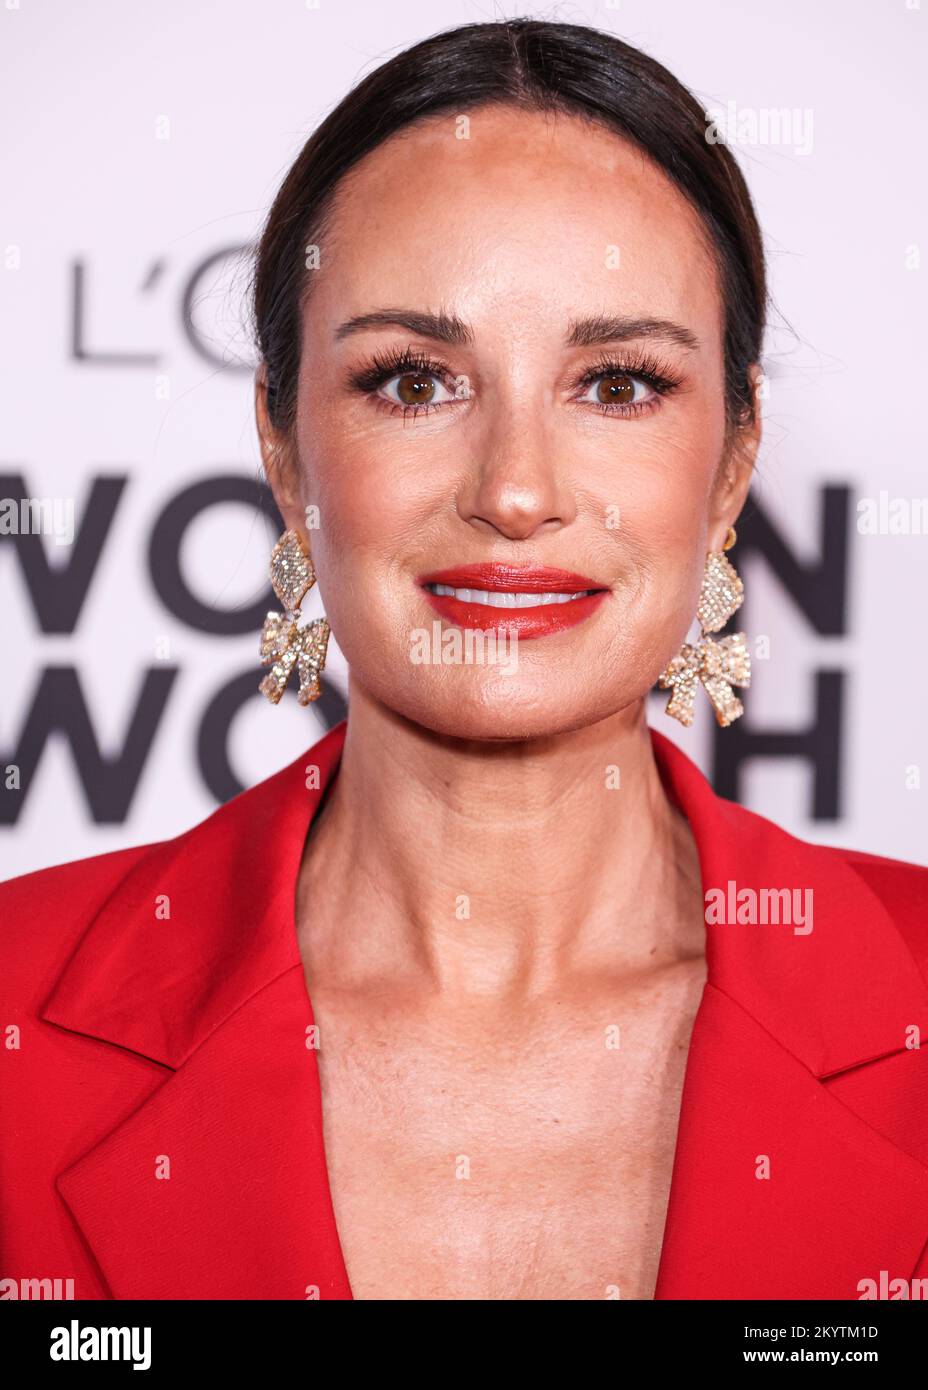 Los Angeles, United States. 01st Dec, 2022. LOS ANGELES, CALIFORNIA, USA - DECEMBER 01: American entertainment reporter Catt Sadler arrives at the L'Oreal Paris' Women Of Worth Celebration 2022 held at The Ebell of Los Angeles on December 1, 2022 in Los Angeles, California, United States. (Photo by Xavier Collin/Image Press Agency) Credit: Image Press Agency/Alamy Live News Stock Photo